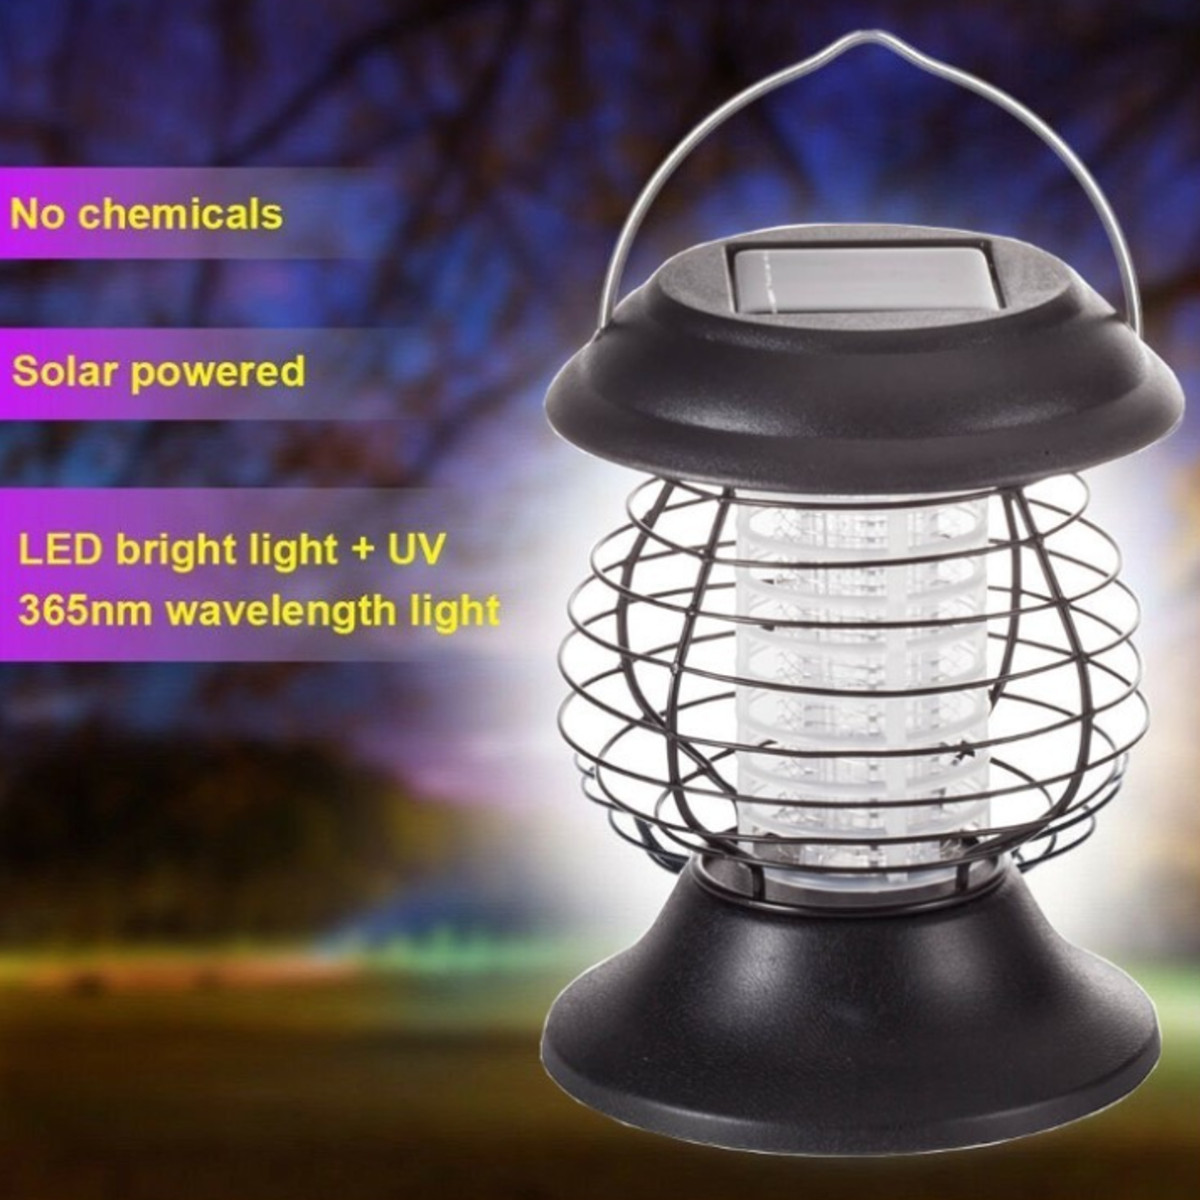 Electric-Fly-Zapper-Mosquito-Insect-Killer-UV-LED-Purple-Tube-Light-Trap-Pest-Solar-IP65-Working-8-H-1693978-2